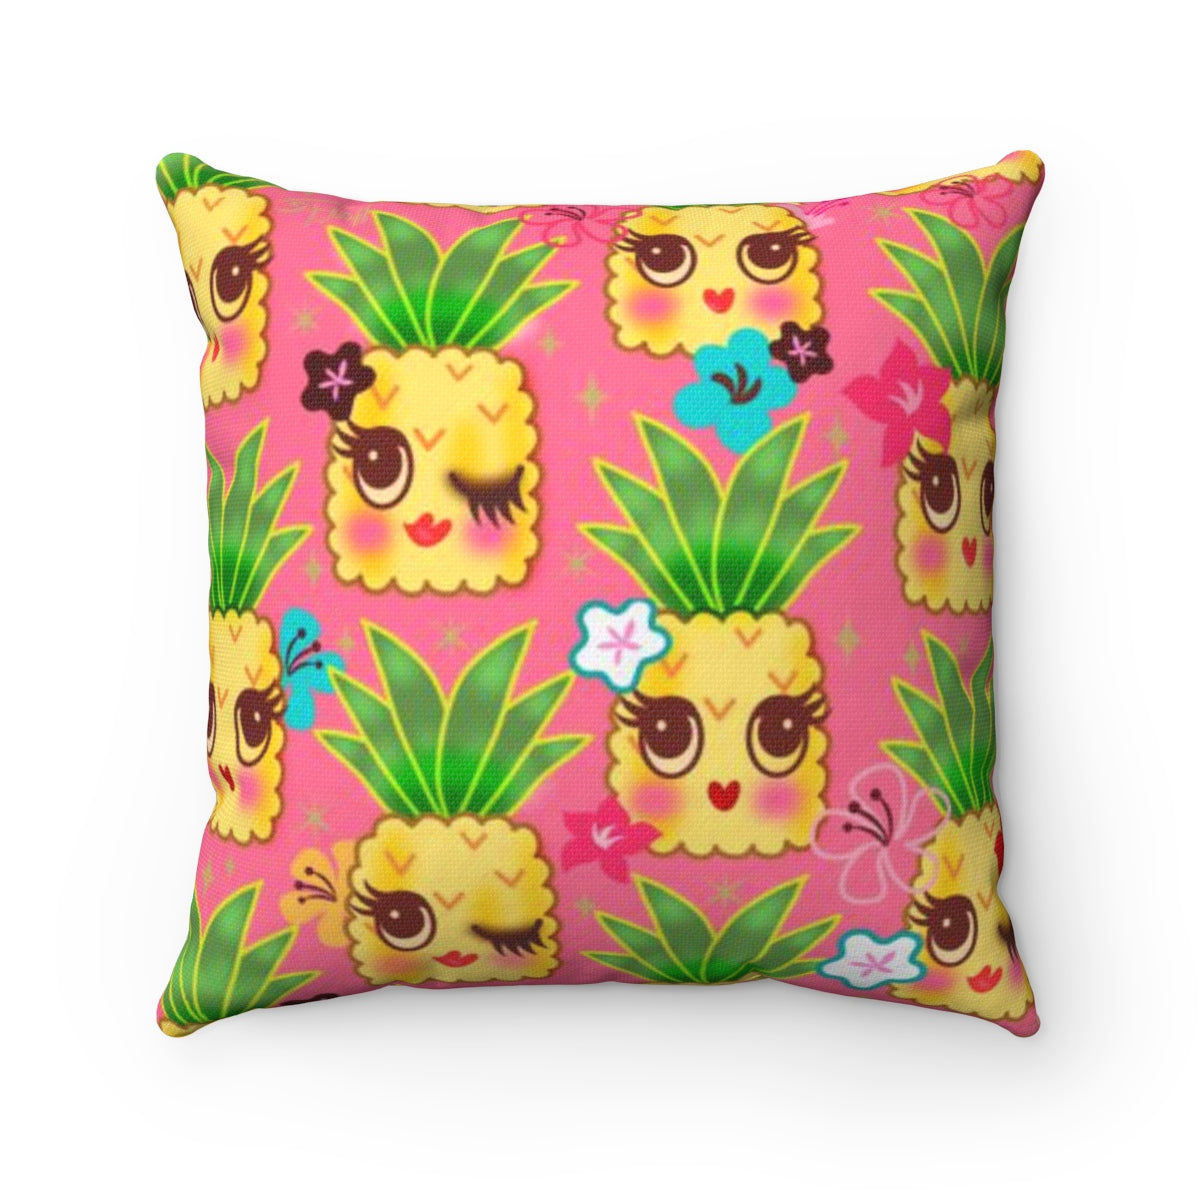 Happy Kawaii Cute Pineapples on Pink • Square Pillow